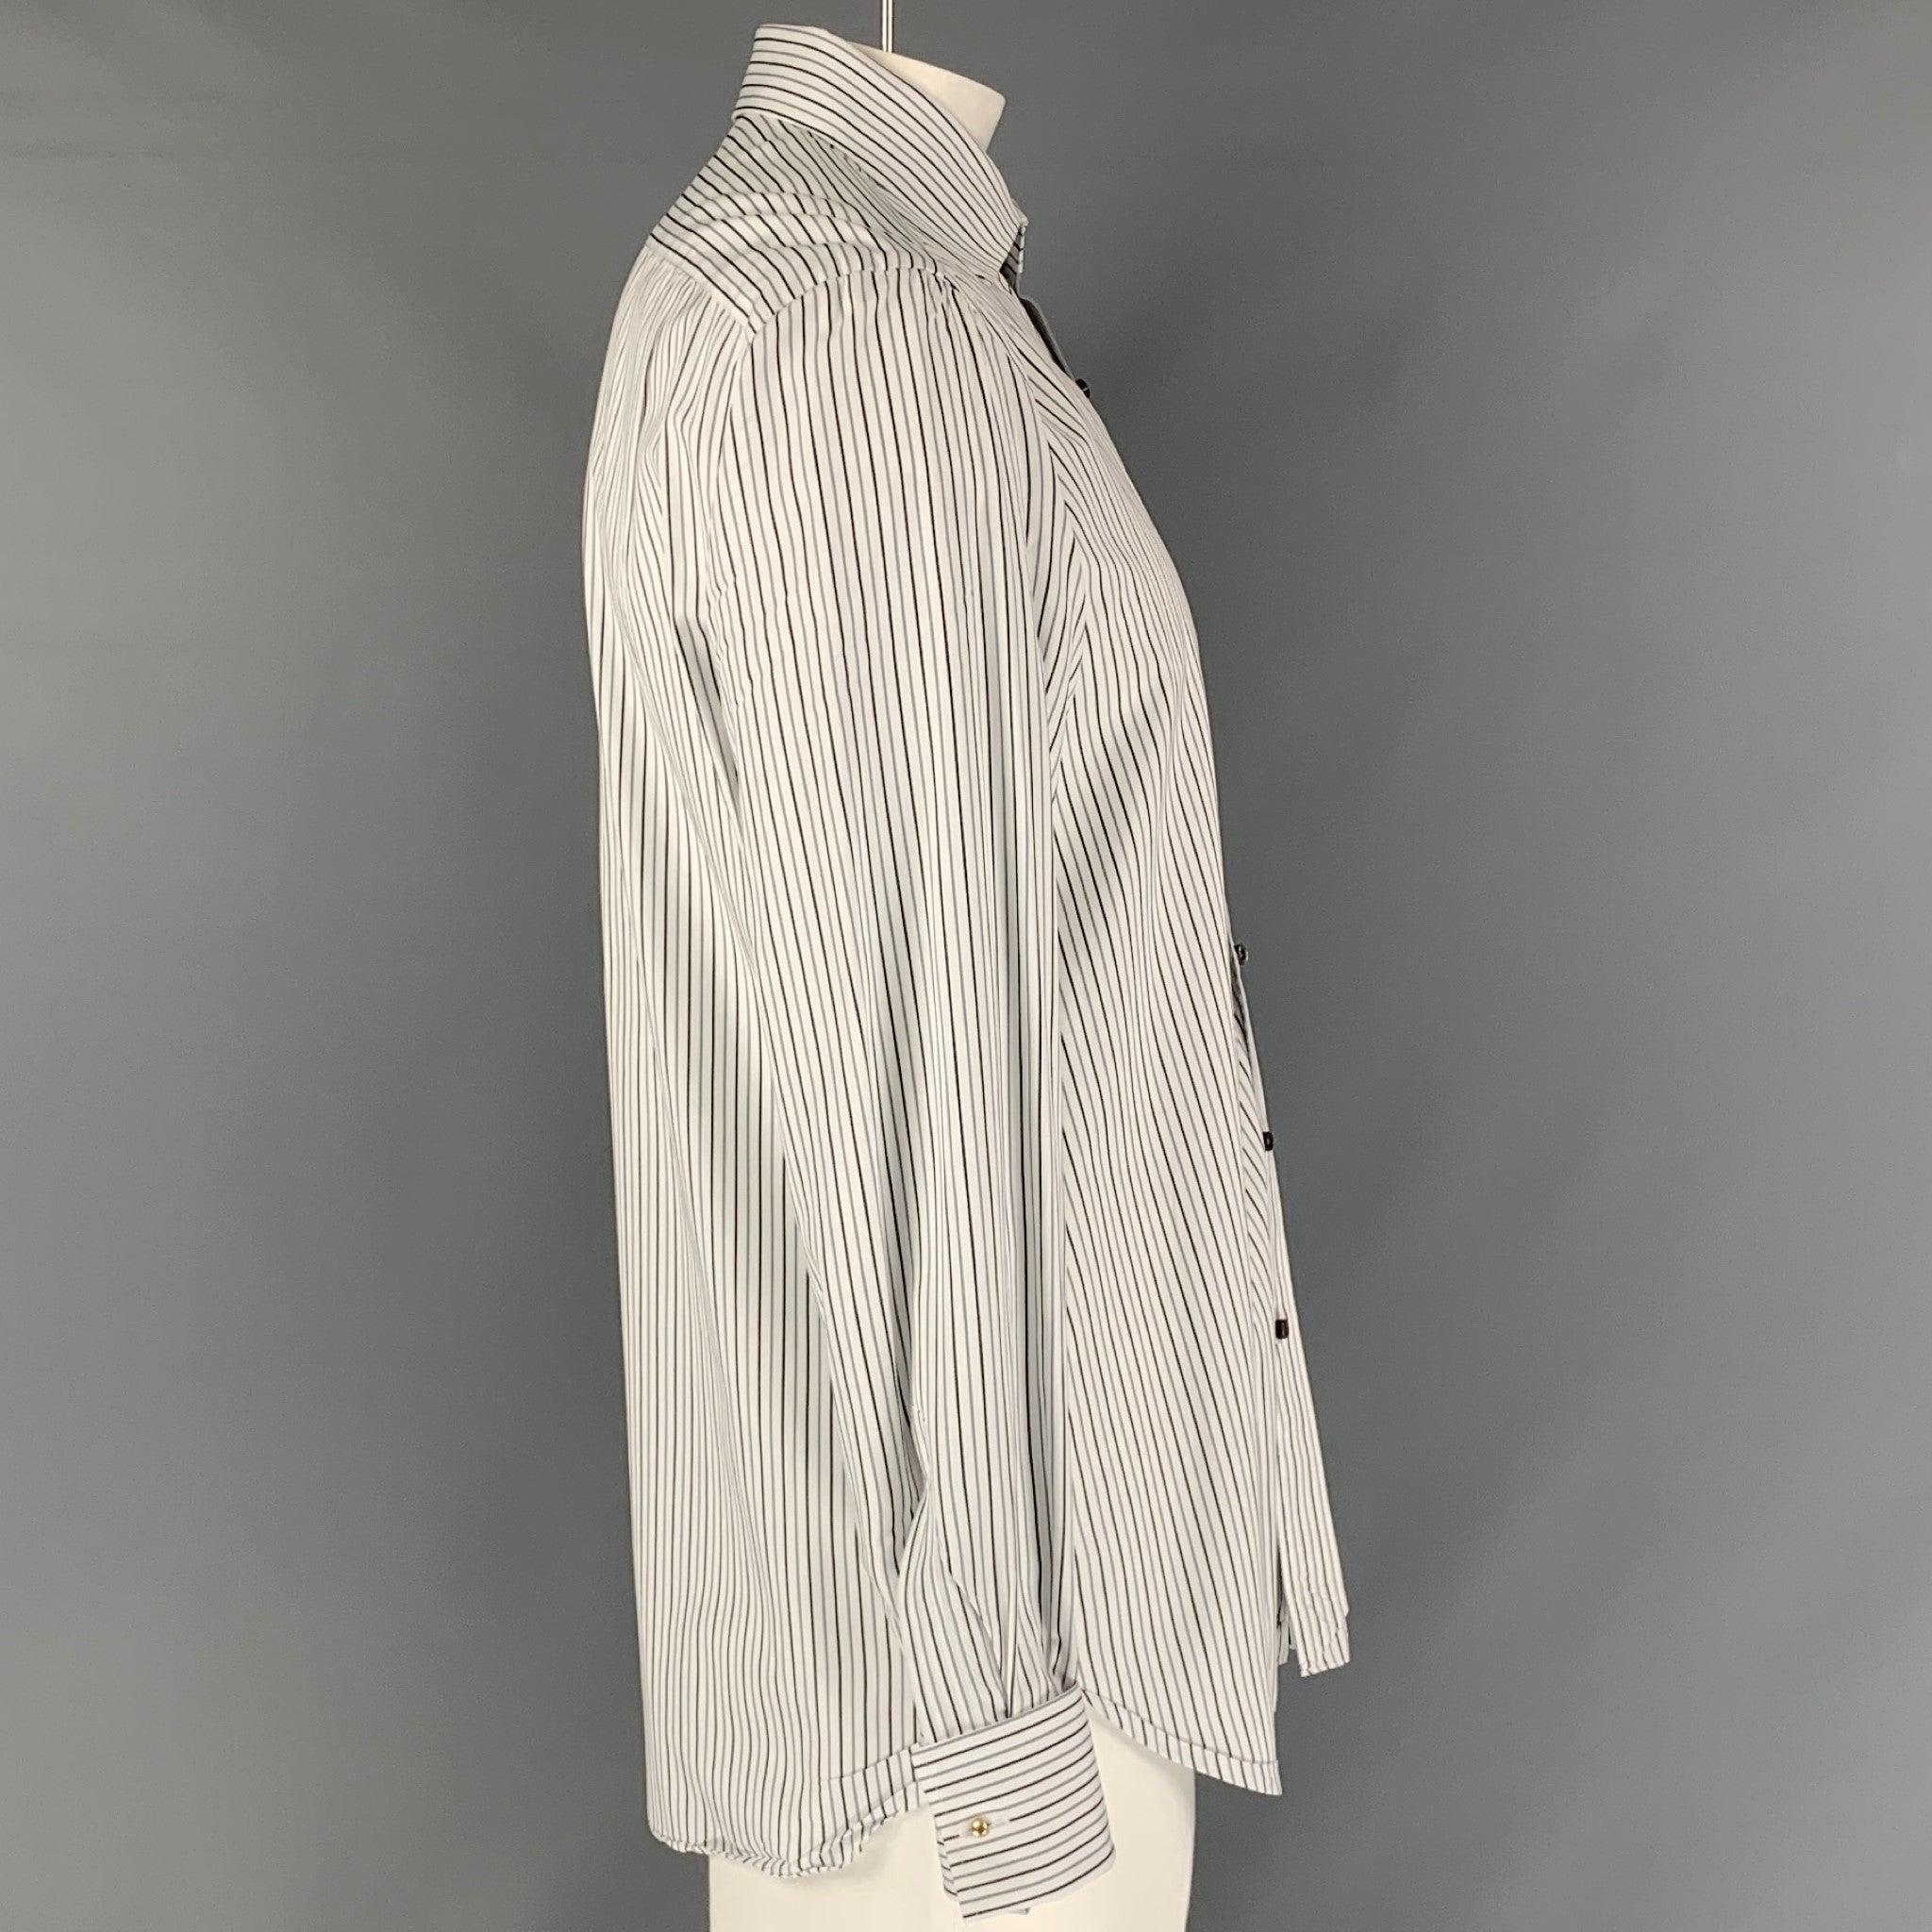 ISAIA long sleeve shirt comes in stripped white and black cotton featuring a spread collar, french cuff, and button down closure. Made in Italy.Excellent Pre-Owned Condition. 

Marked:   42 -16 1/2 

Measurements: 
 
Shoulder: 19.5 inches Chest: 50